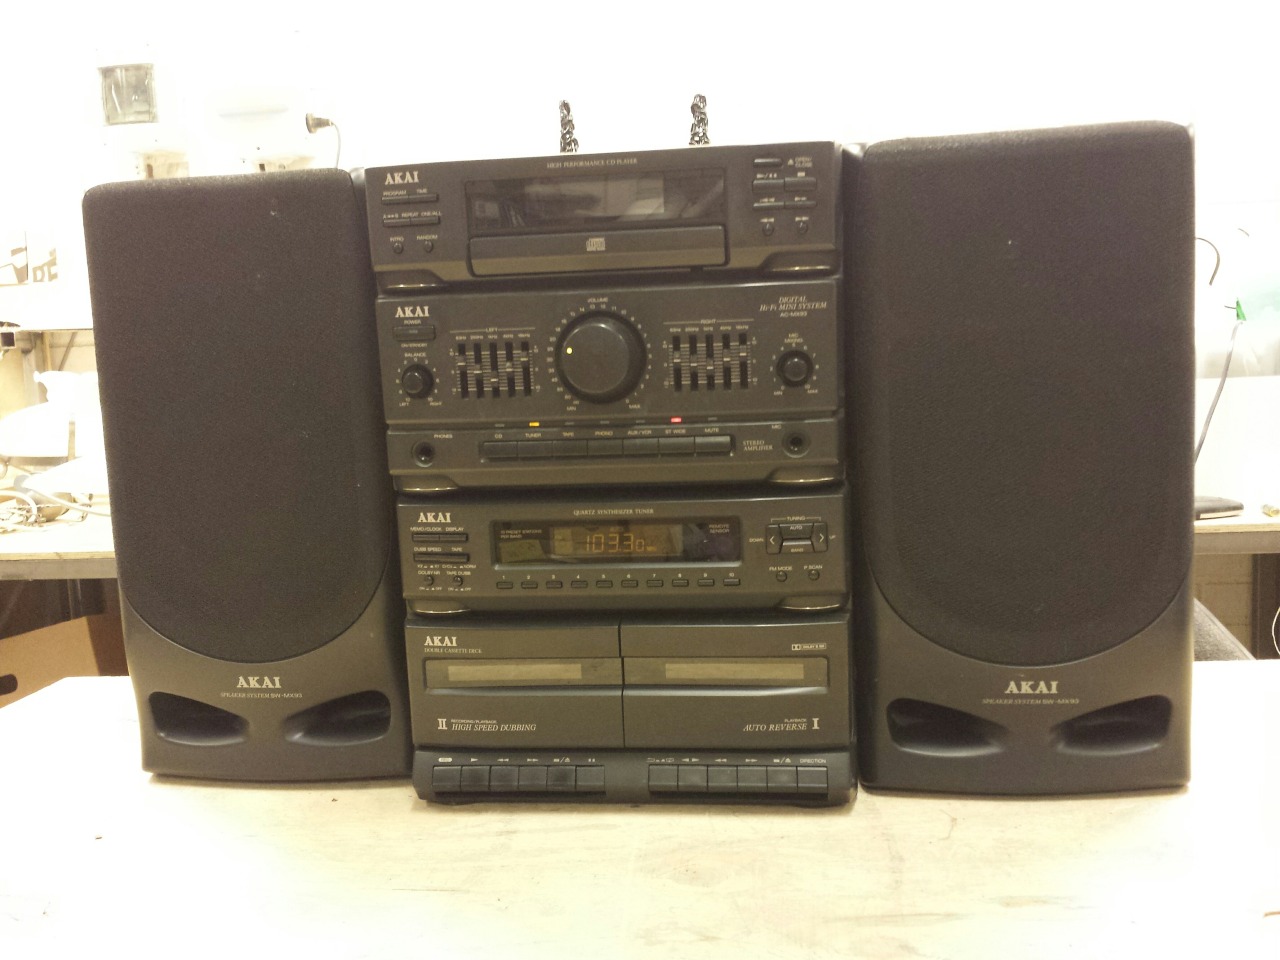 Relic Hunter — AKAI AC-MX93 Compact Stereo System, 1992